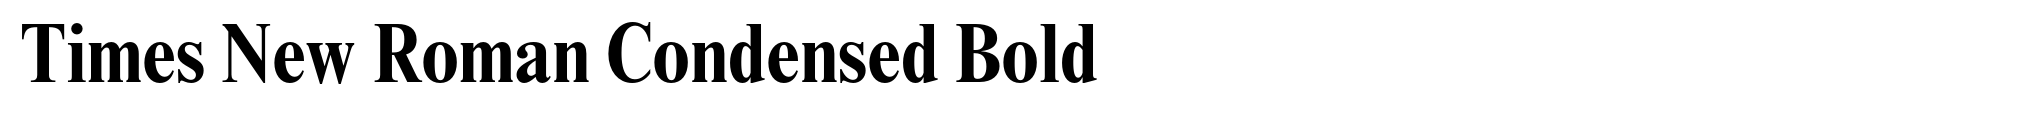 Times New Roman Condensed Bold image